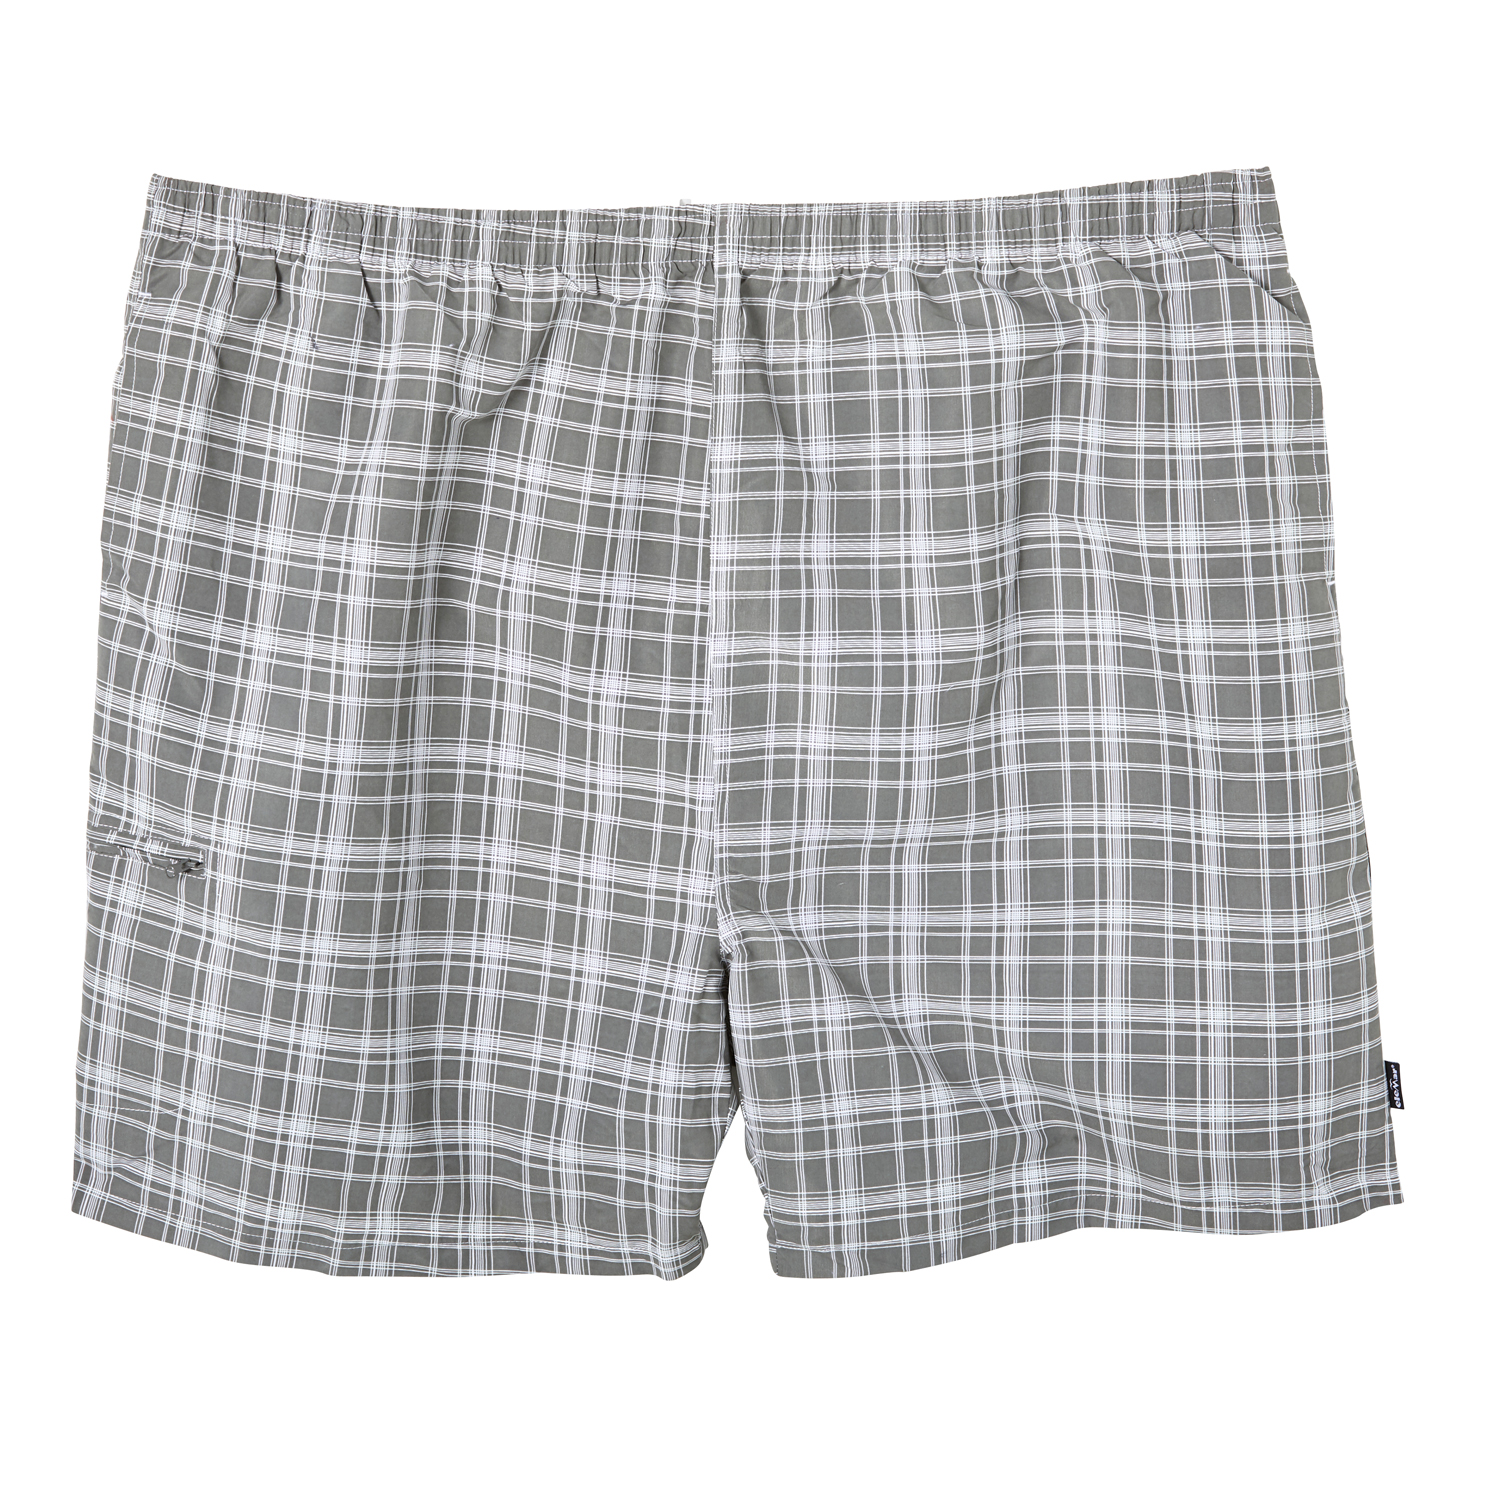 Swim shorts in grey-white checkered by eleMar up to oversize 10XL